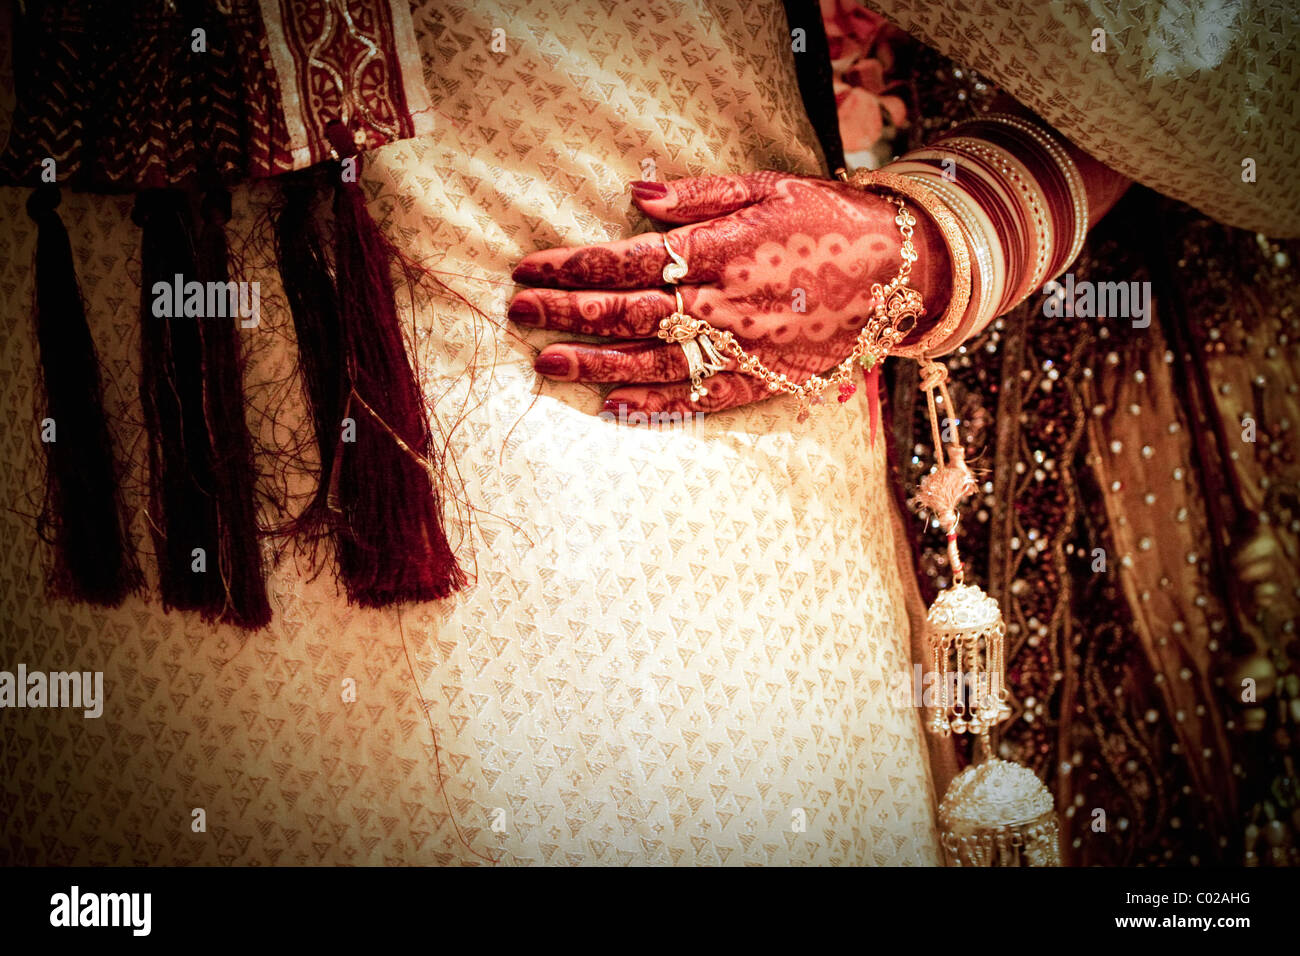 An Indian bride with traditional henna (aka mehndi) paint covering her arms and hands at her wedding day in New Delhi in India. Stock Photo